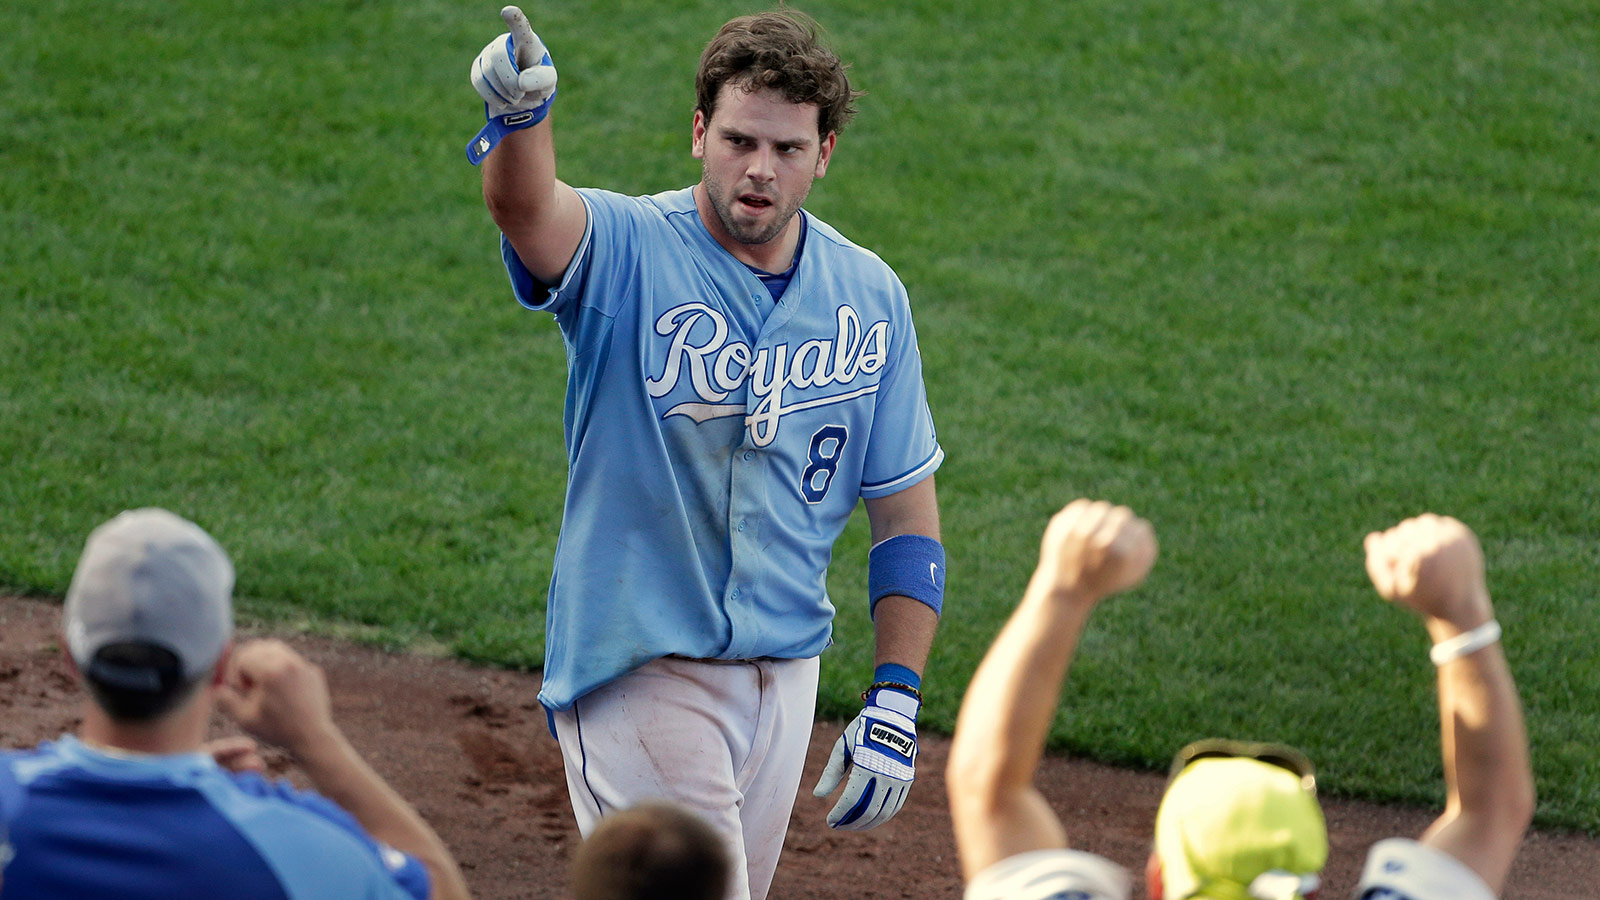 Leftridge: Moustakas Needs Help and Moore Blows Goats